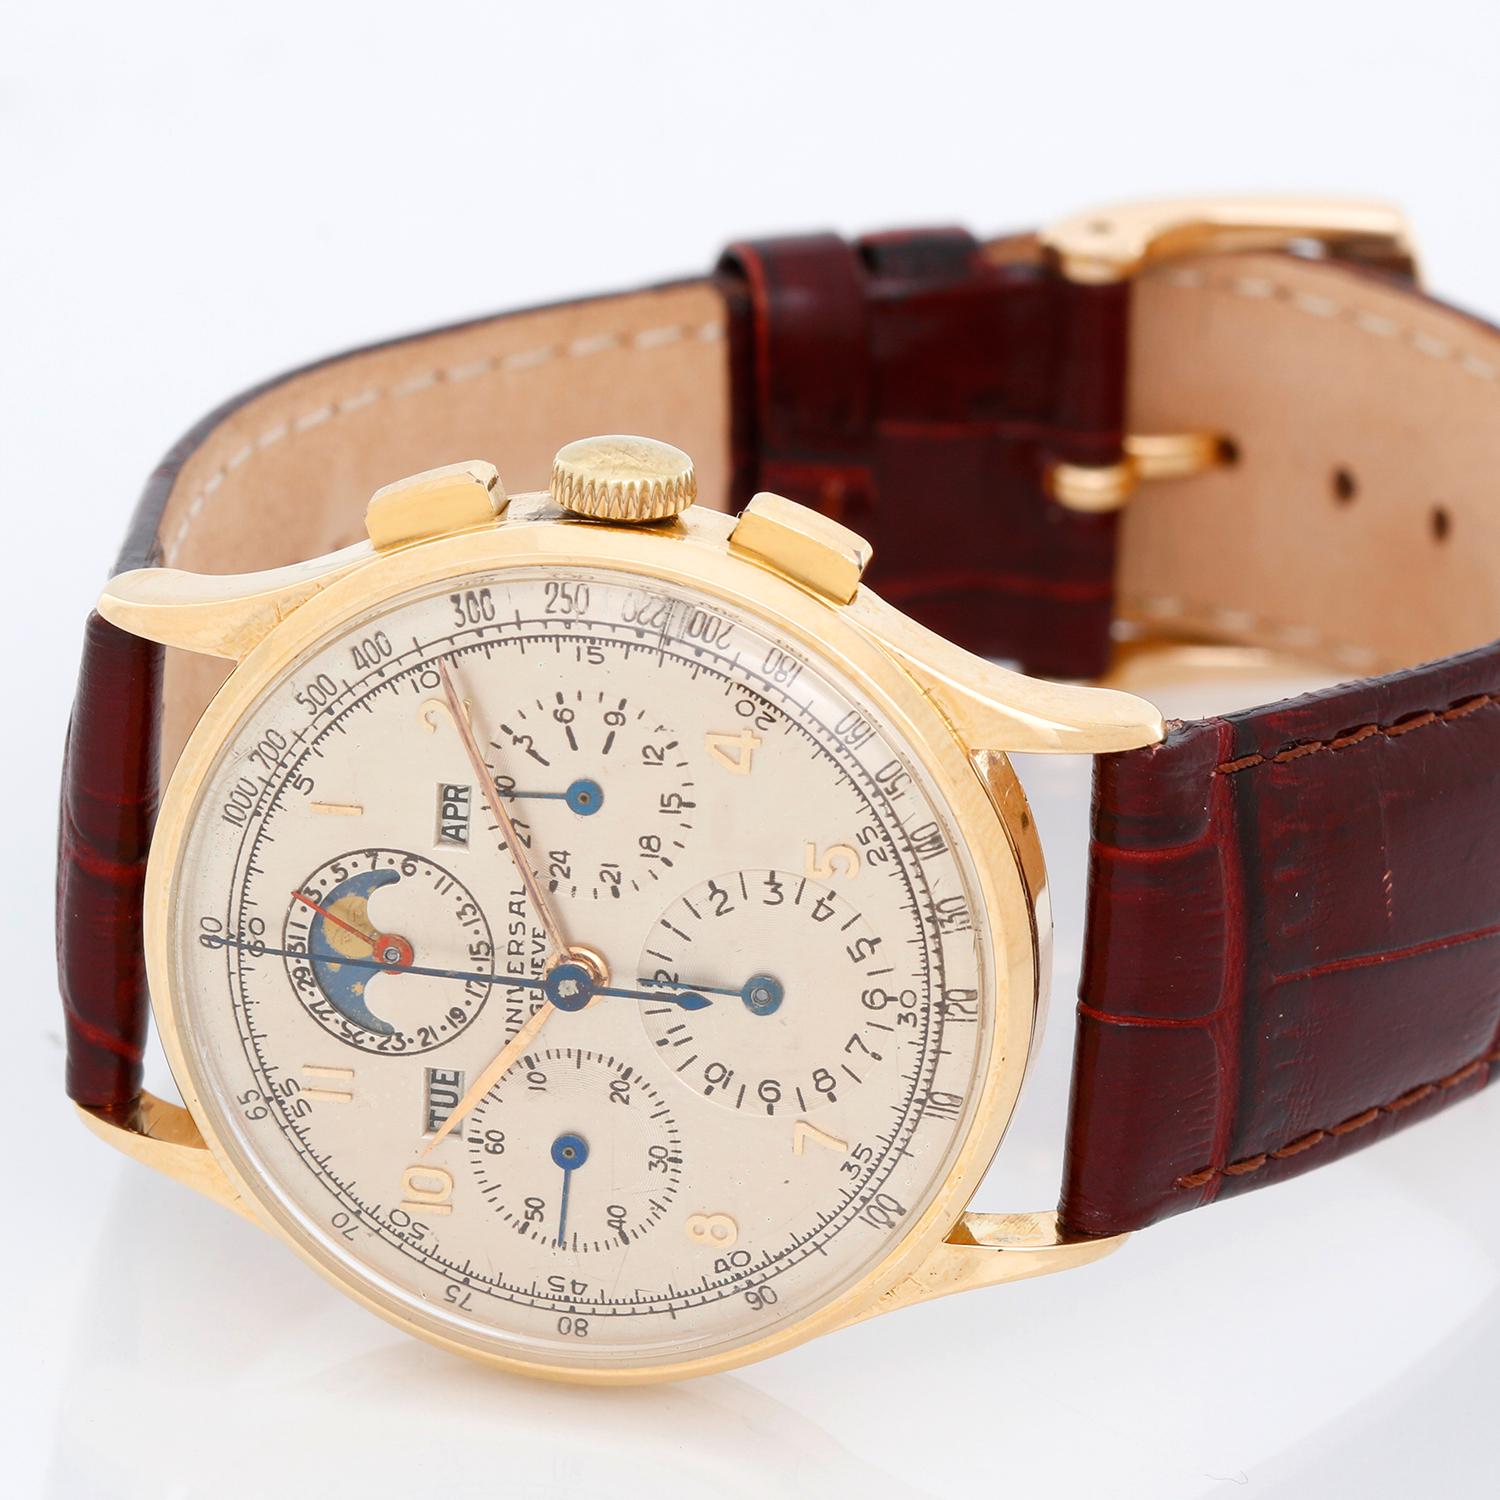 Universal Geneve 18K Yellow Gold  Chronograph Watch - Manual winding. 18K Yellow gold  ( 35 mm ). Silvered dial with raised gold Arabic numerals; Black registers, telemeter, tachometer, triple date and moon phases, blue hands. Burgundy strap.